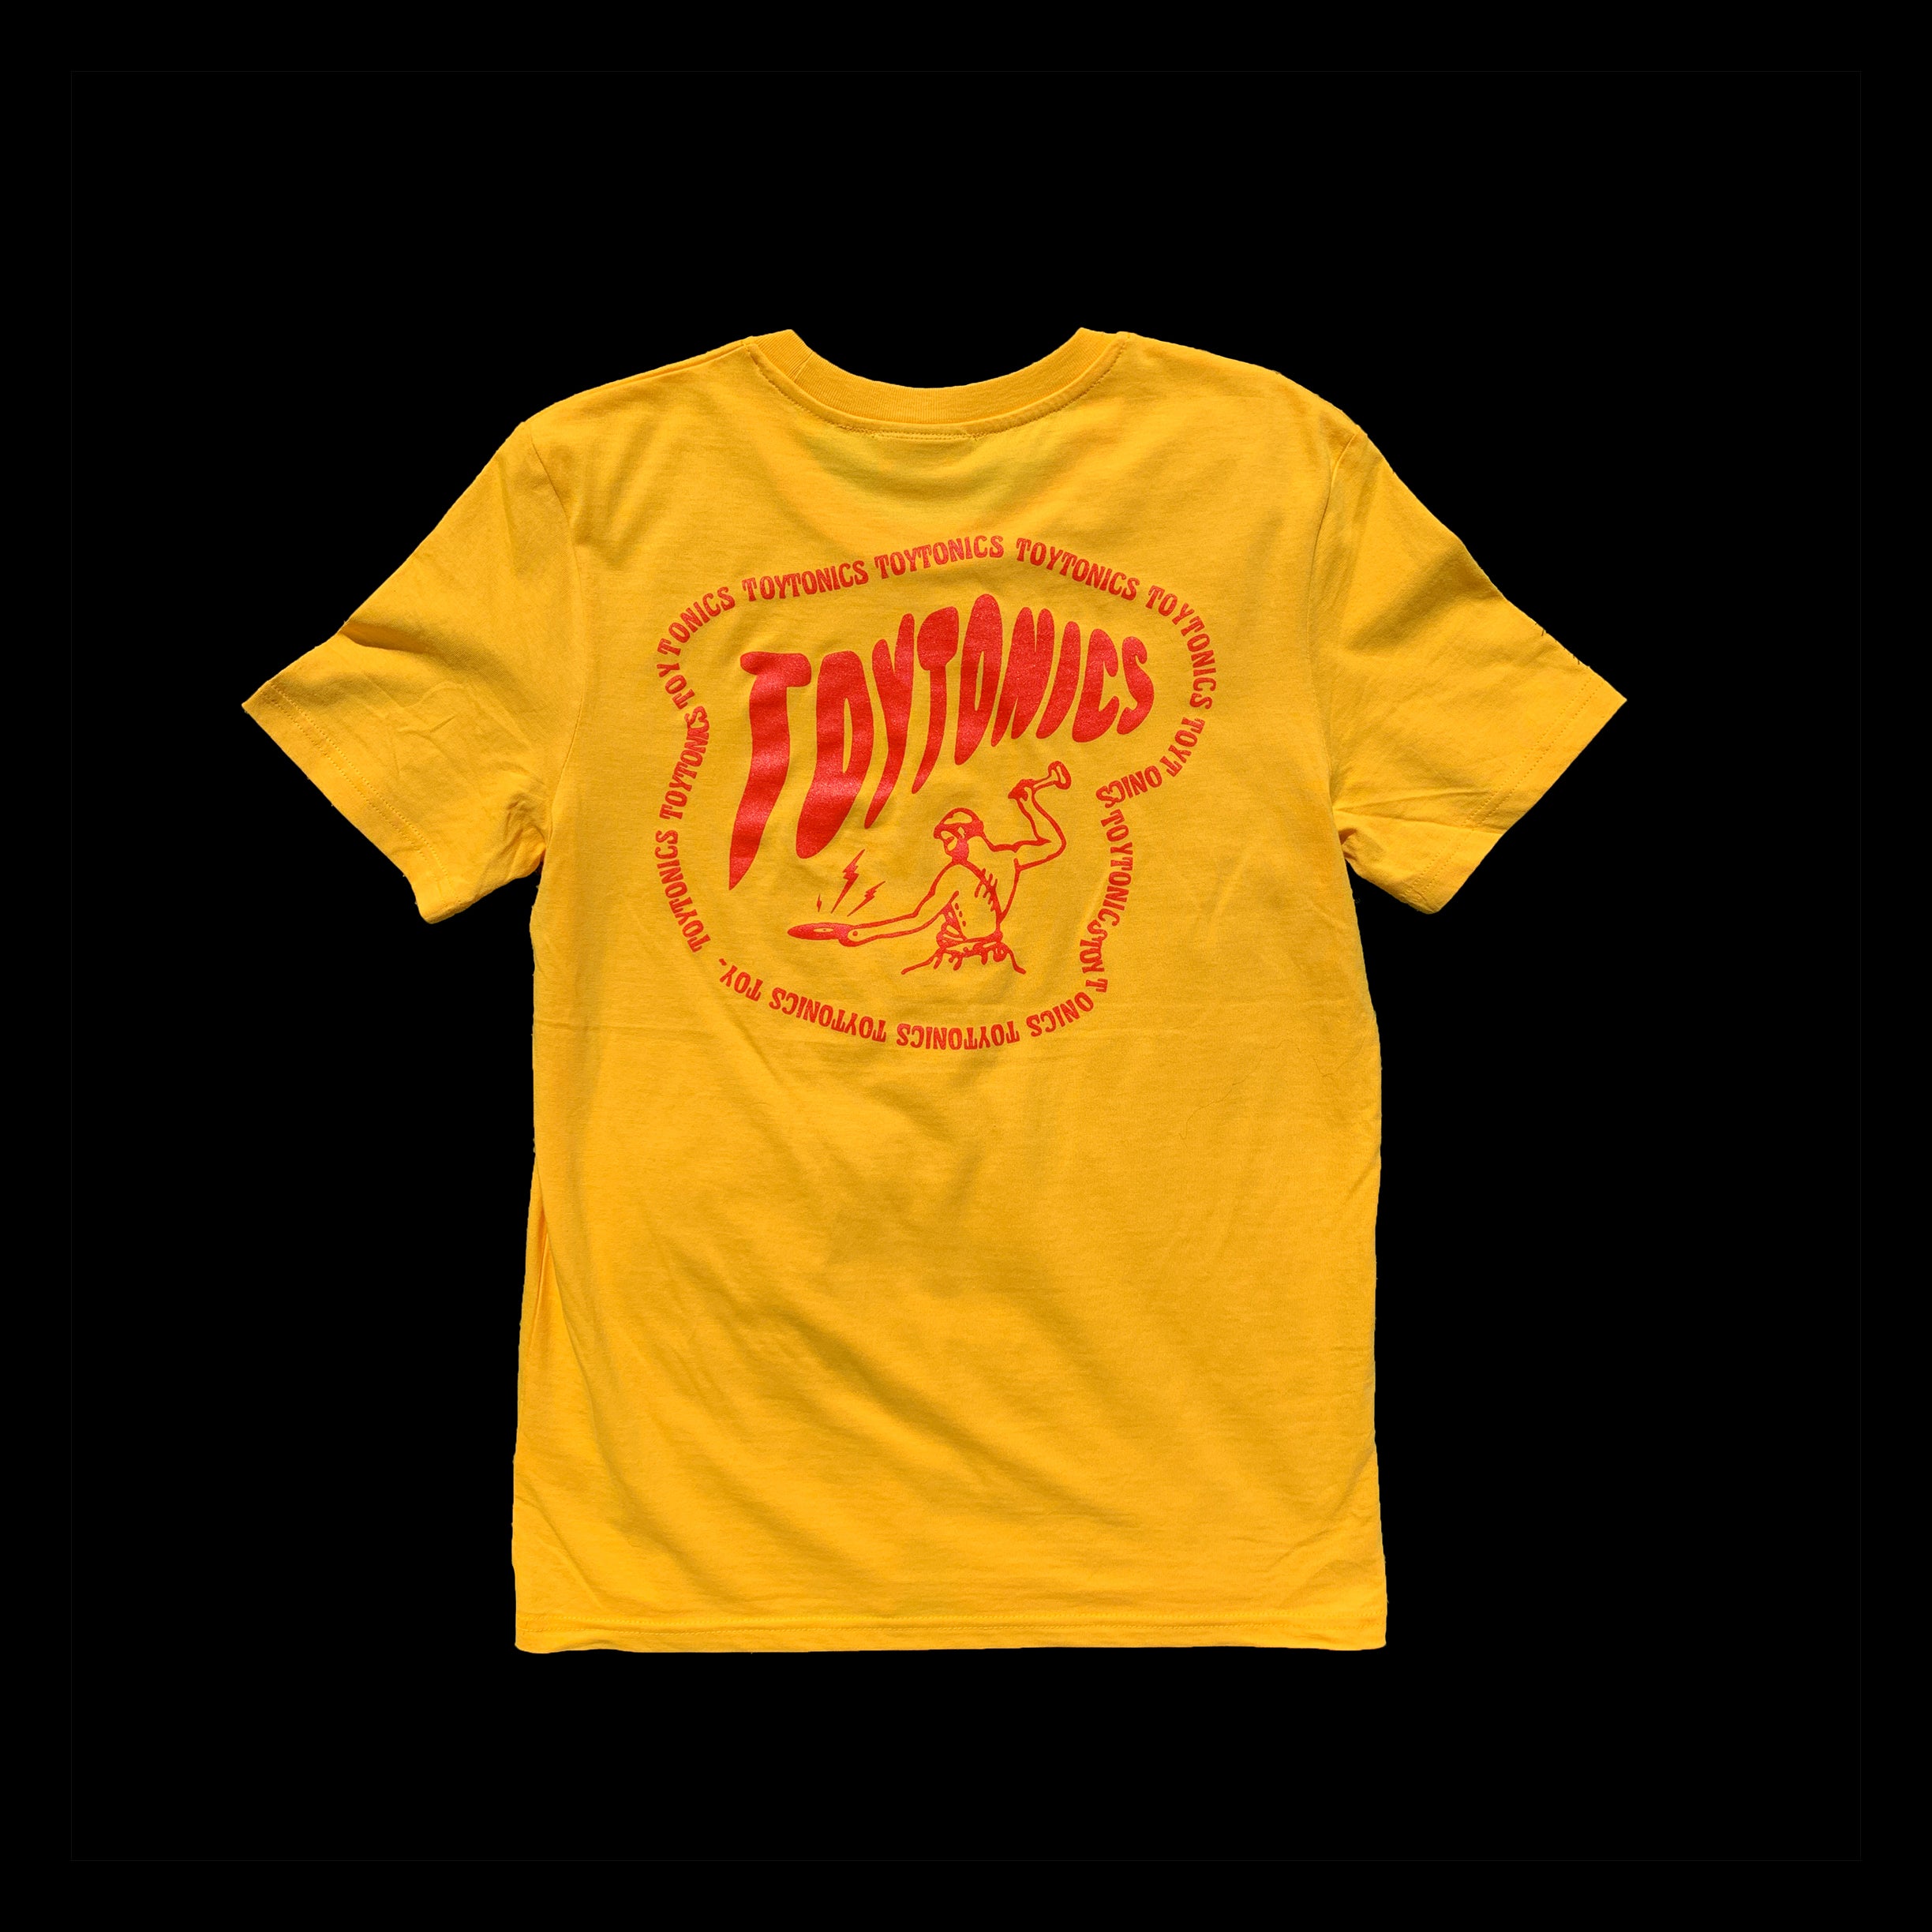 Wobble shirt yellow – Limited to 150